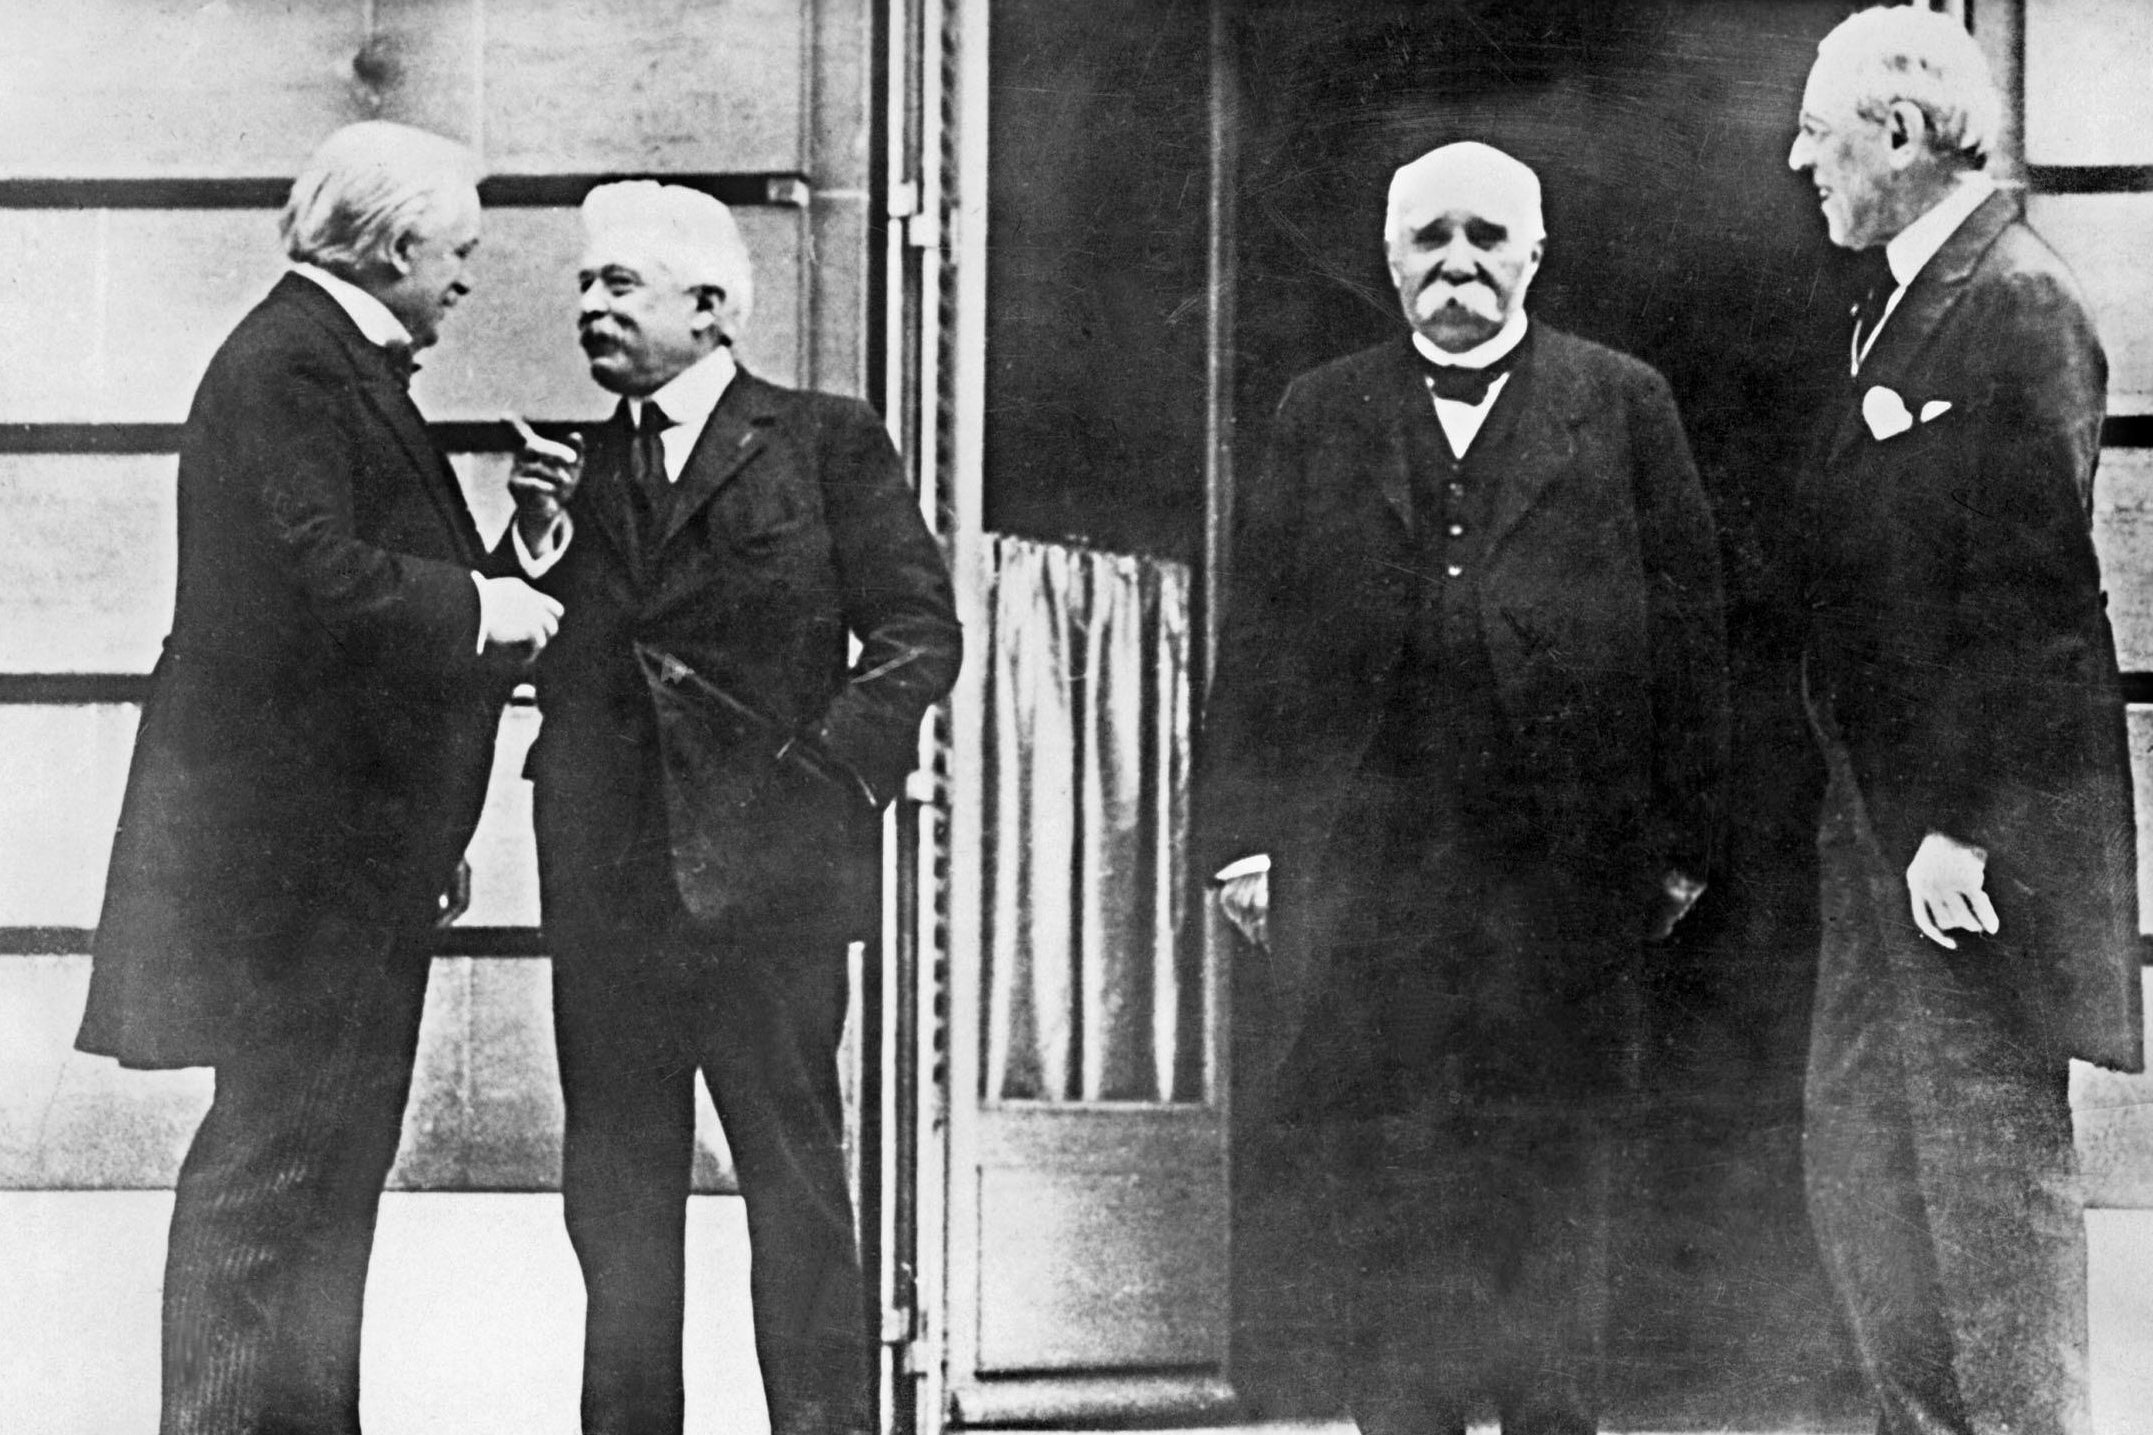 George and Orlando speak to each other with Clemenceau and Wilson nearby